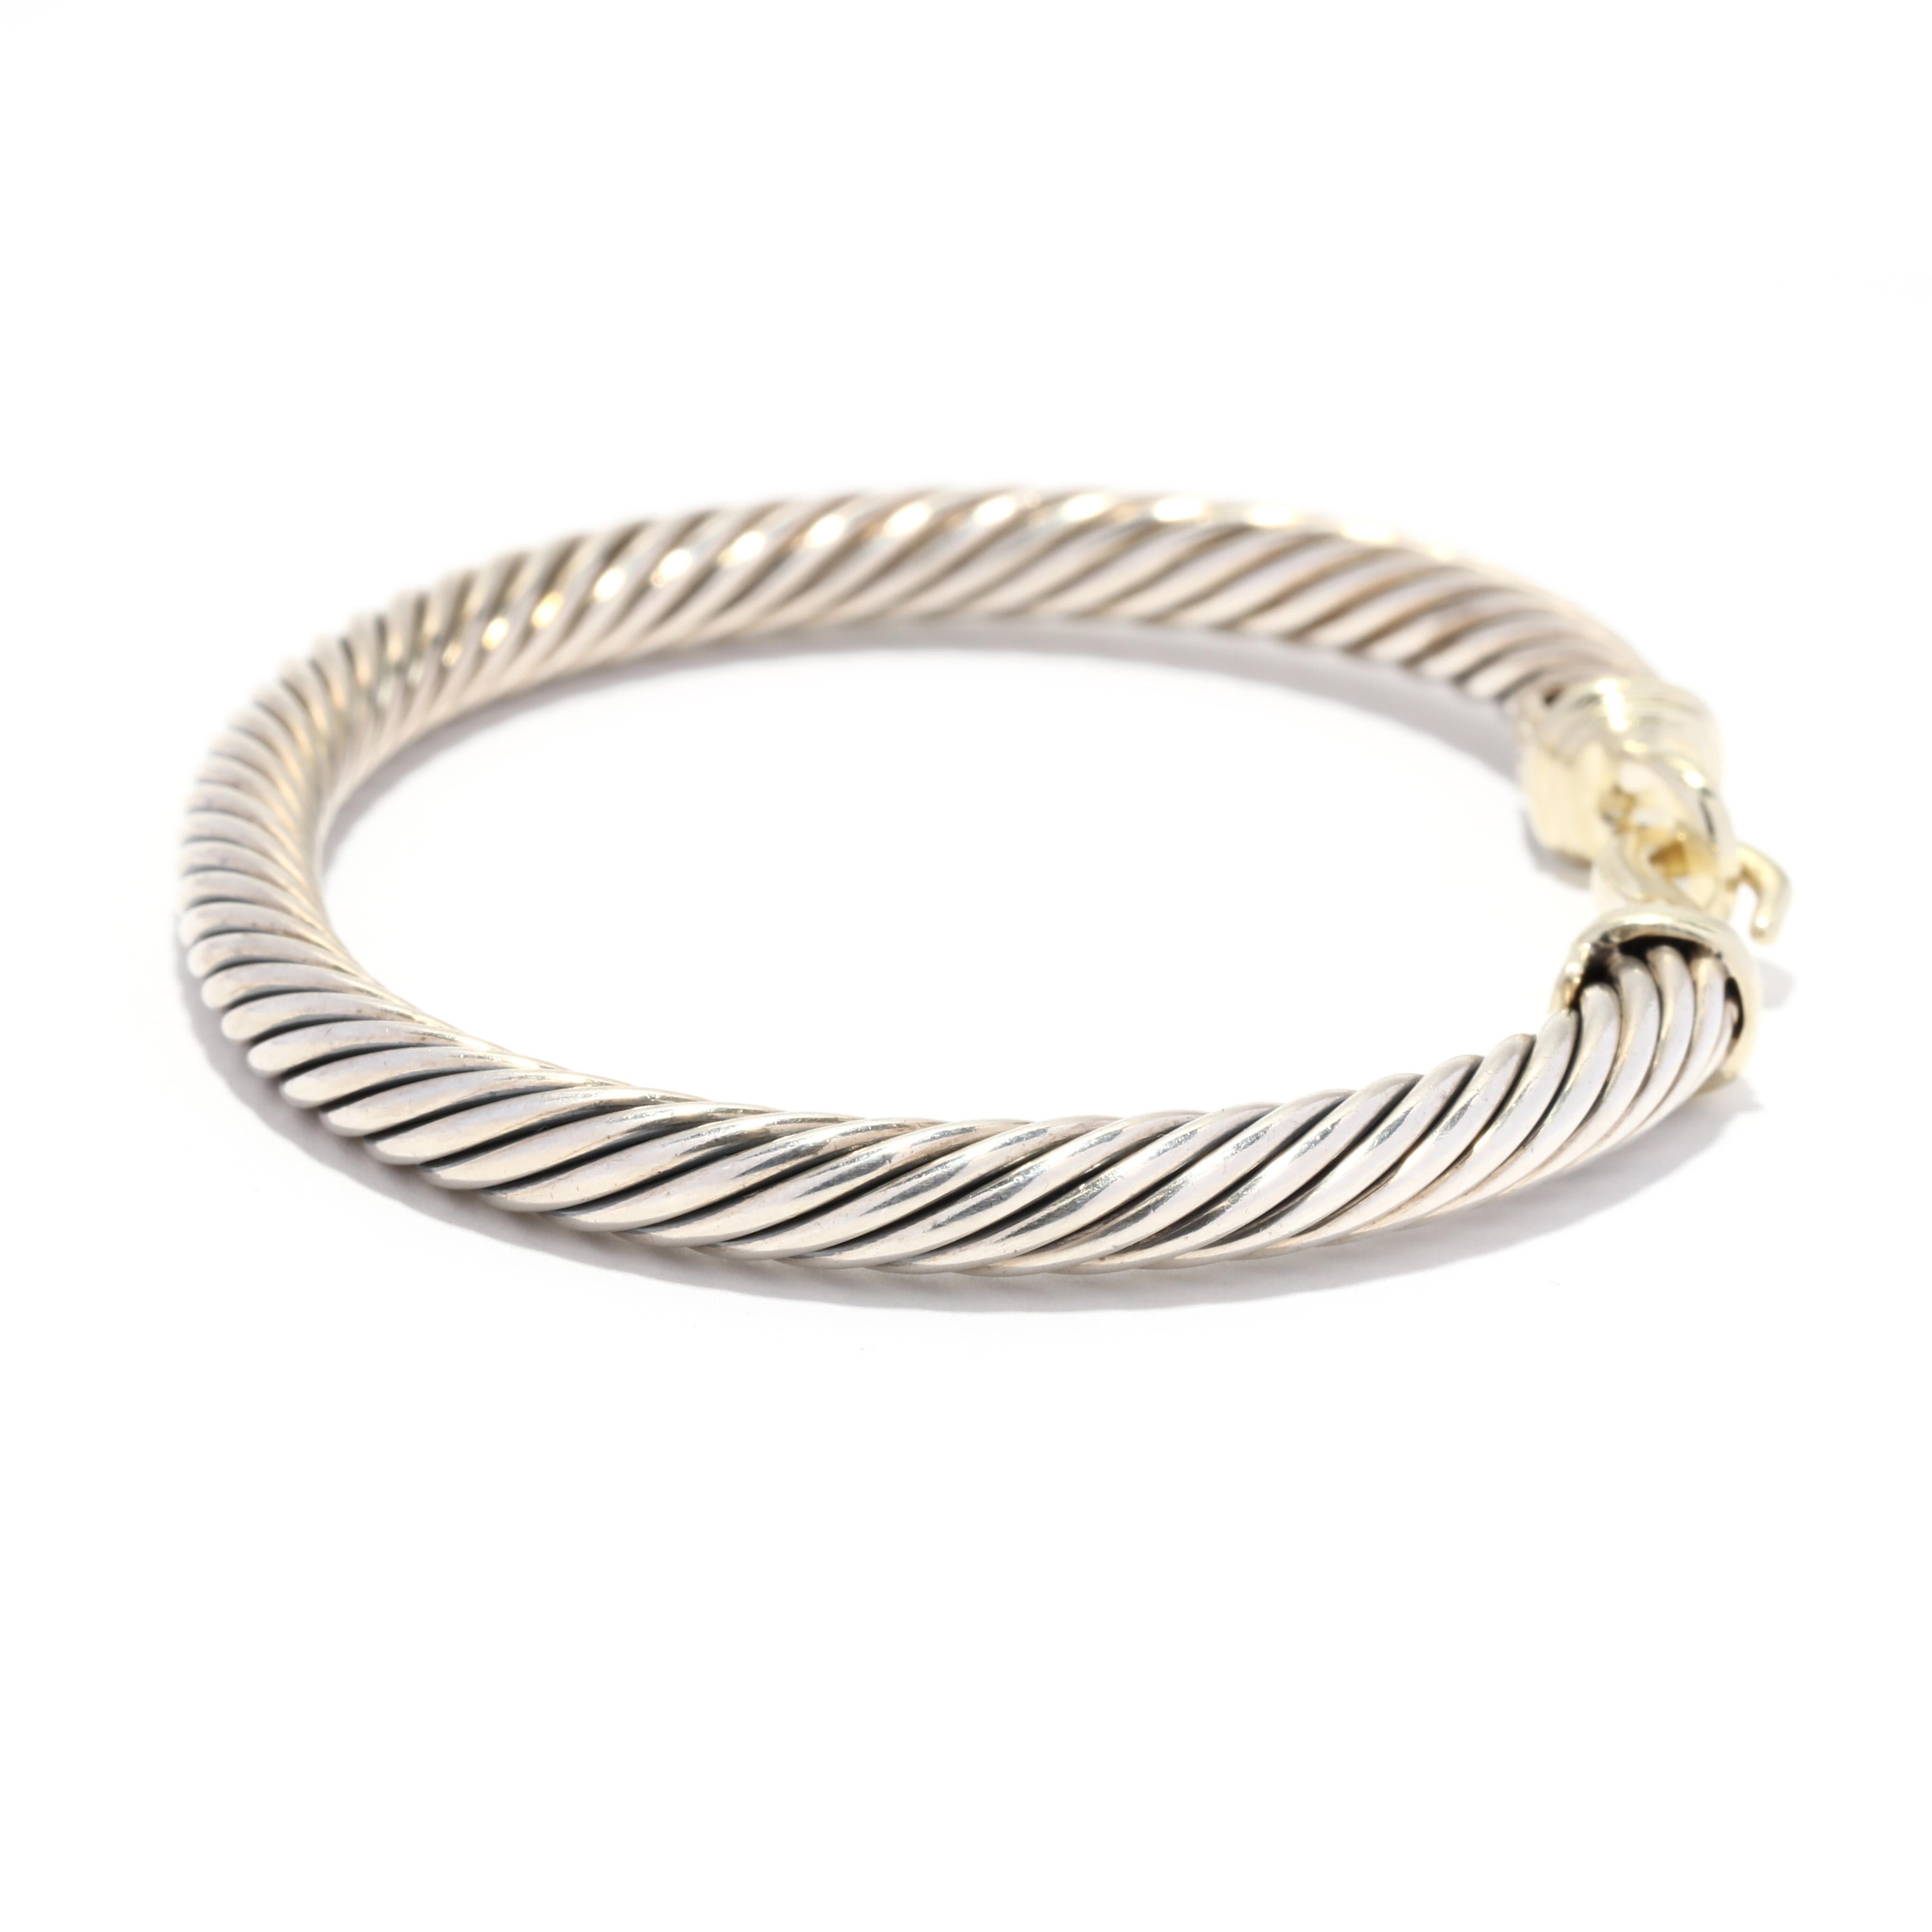 A vintage 14 karat yellow gold and sterling silver buckle cuff bracelet design by David Yurman. This simple bracelet features an adjustable silver cable motif bracelet with a gold hook and eye clasp in a buckle motif.

Length: 6.26 in.

Width: 1/4